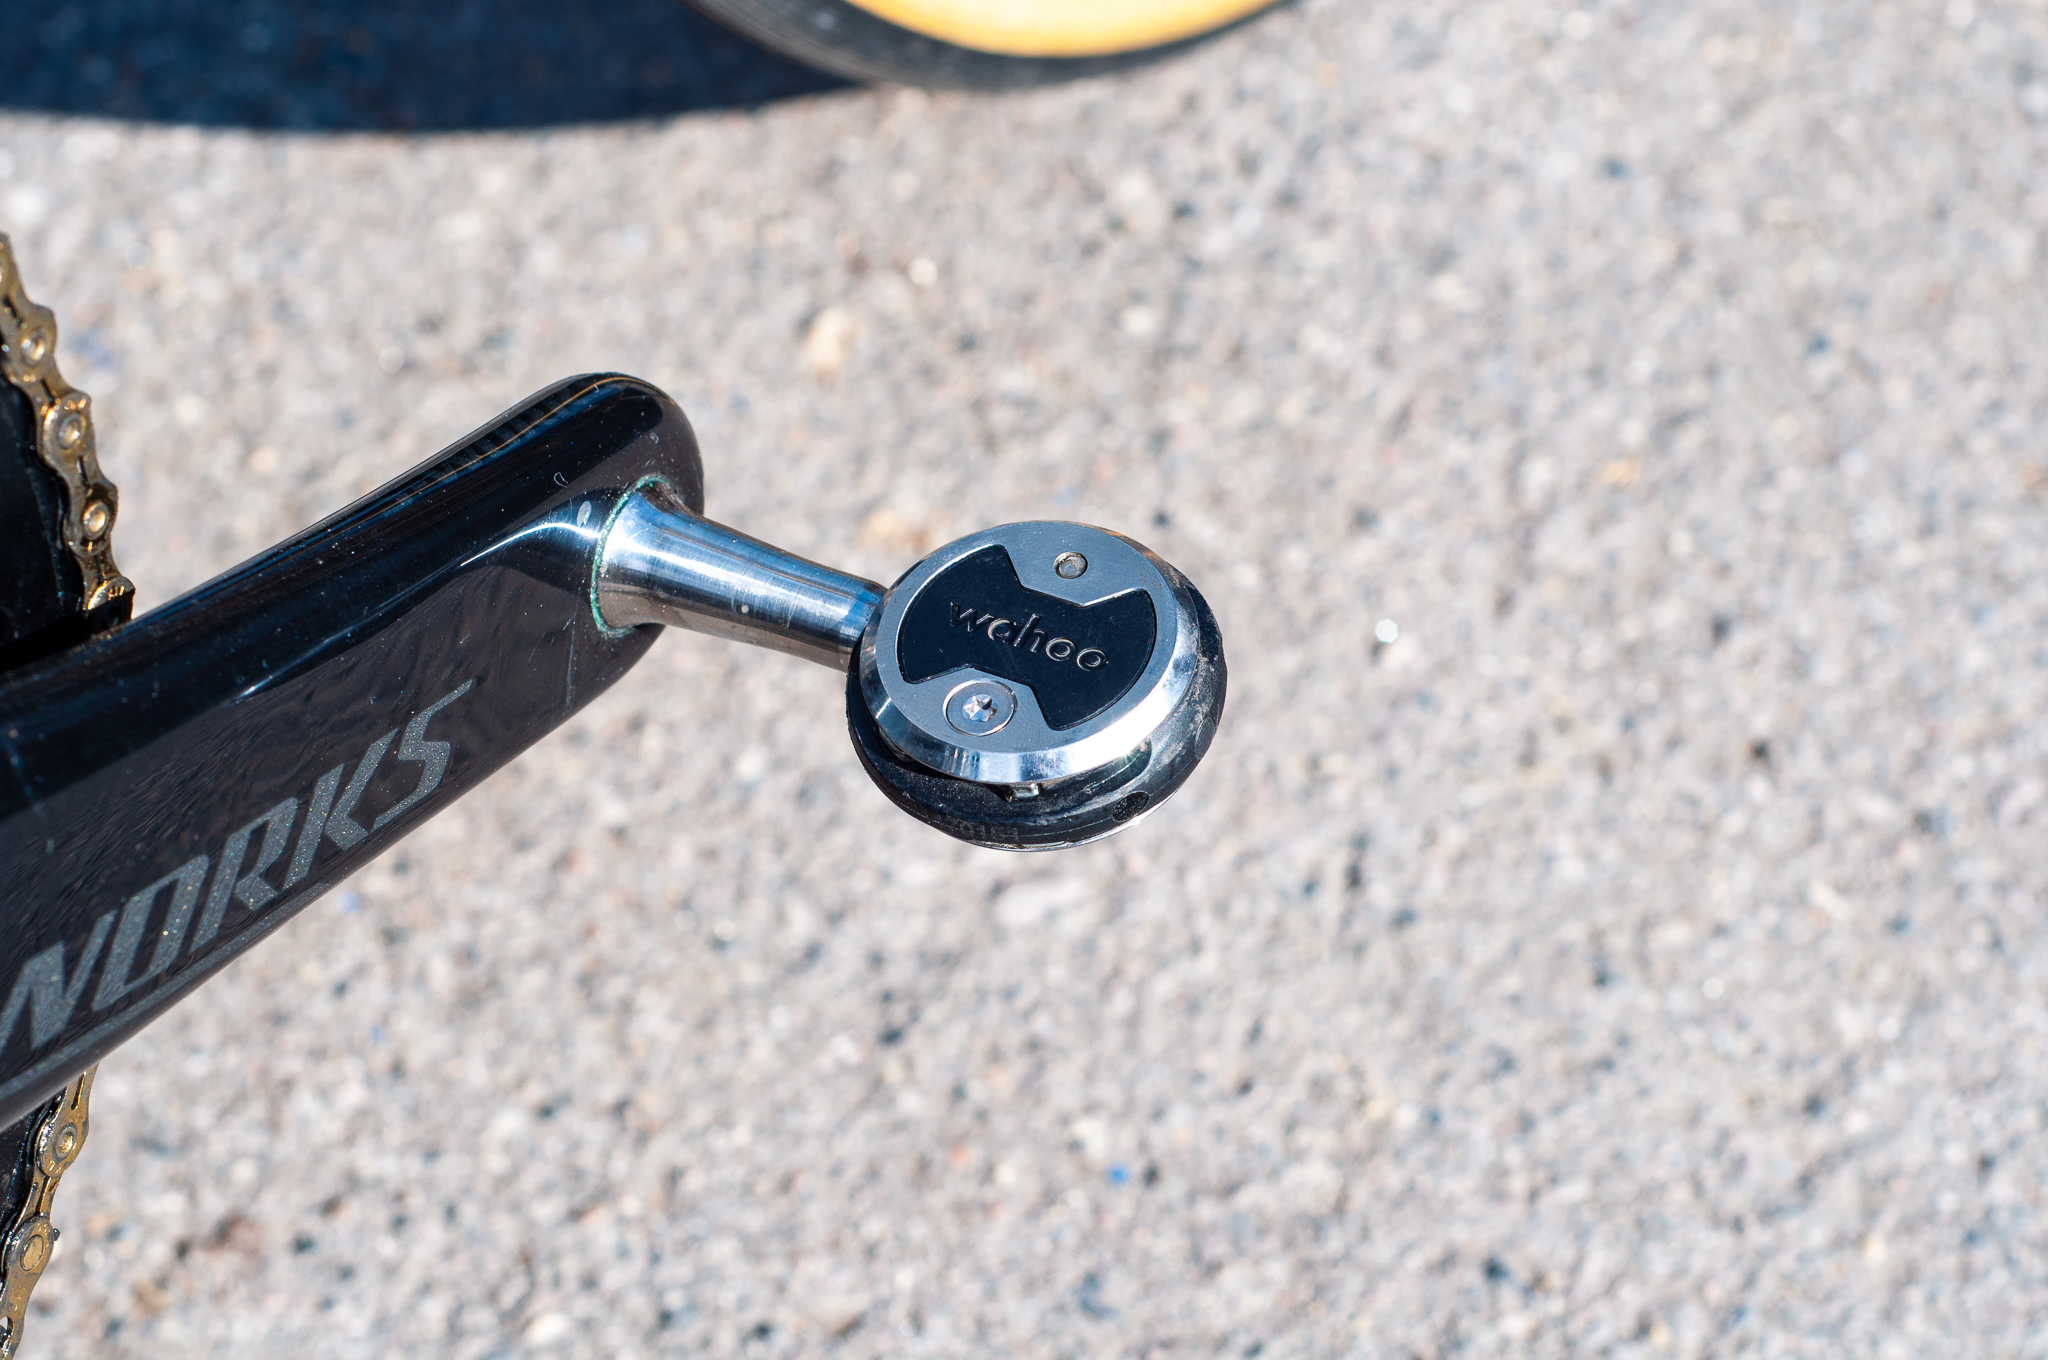 Boomgaard Beven Bandiet Wahoo Speedplay Zero Pedal Review - Hargroves Cycles Blog